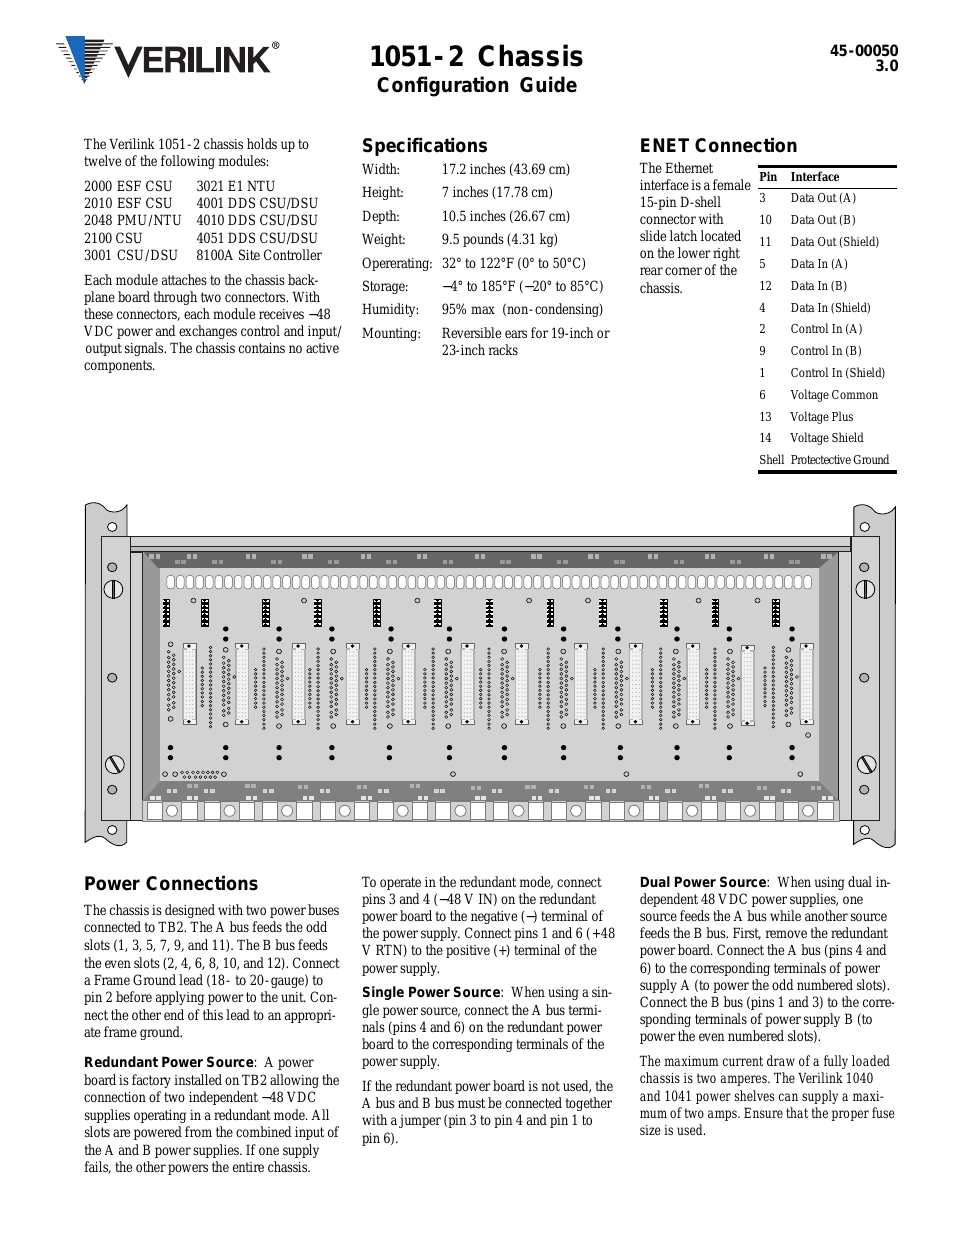 1051-2 Chassis (CG) Configuration/Installation Guide